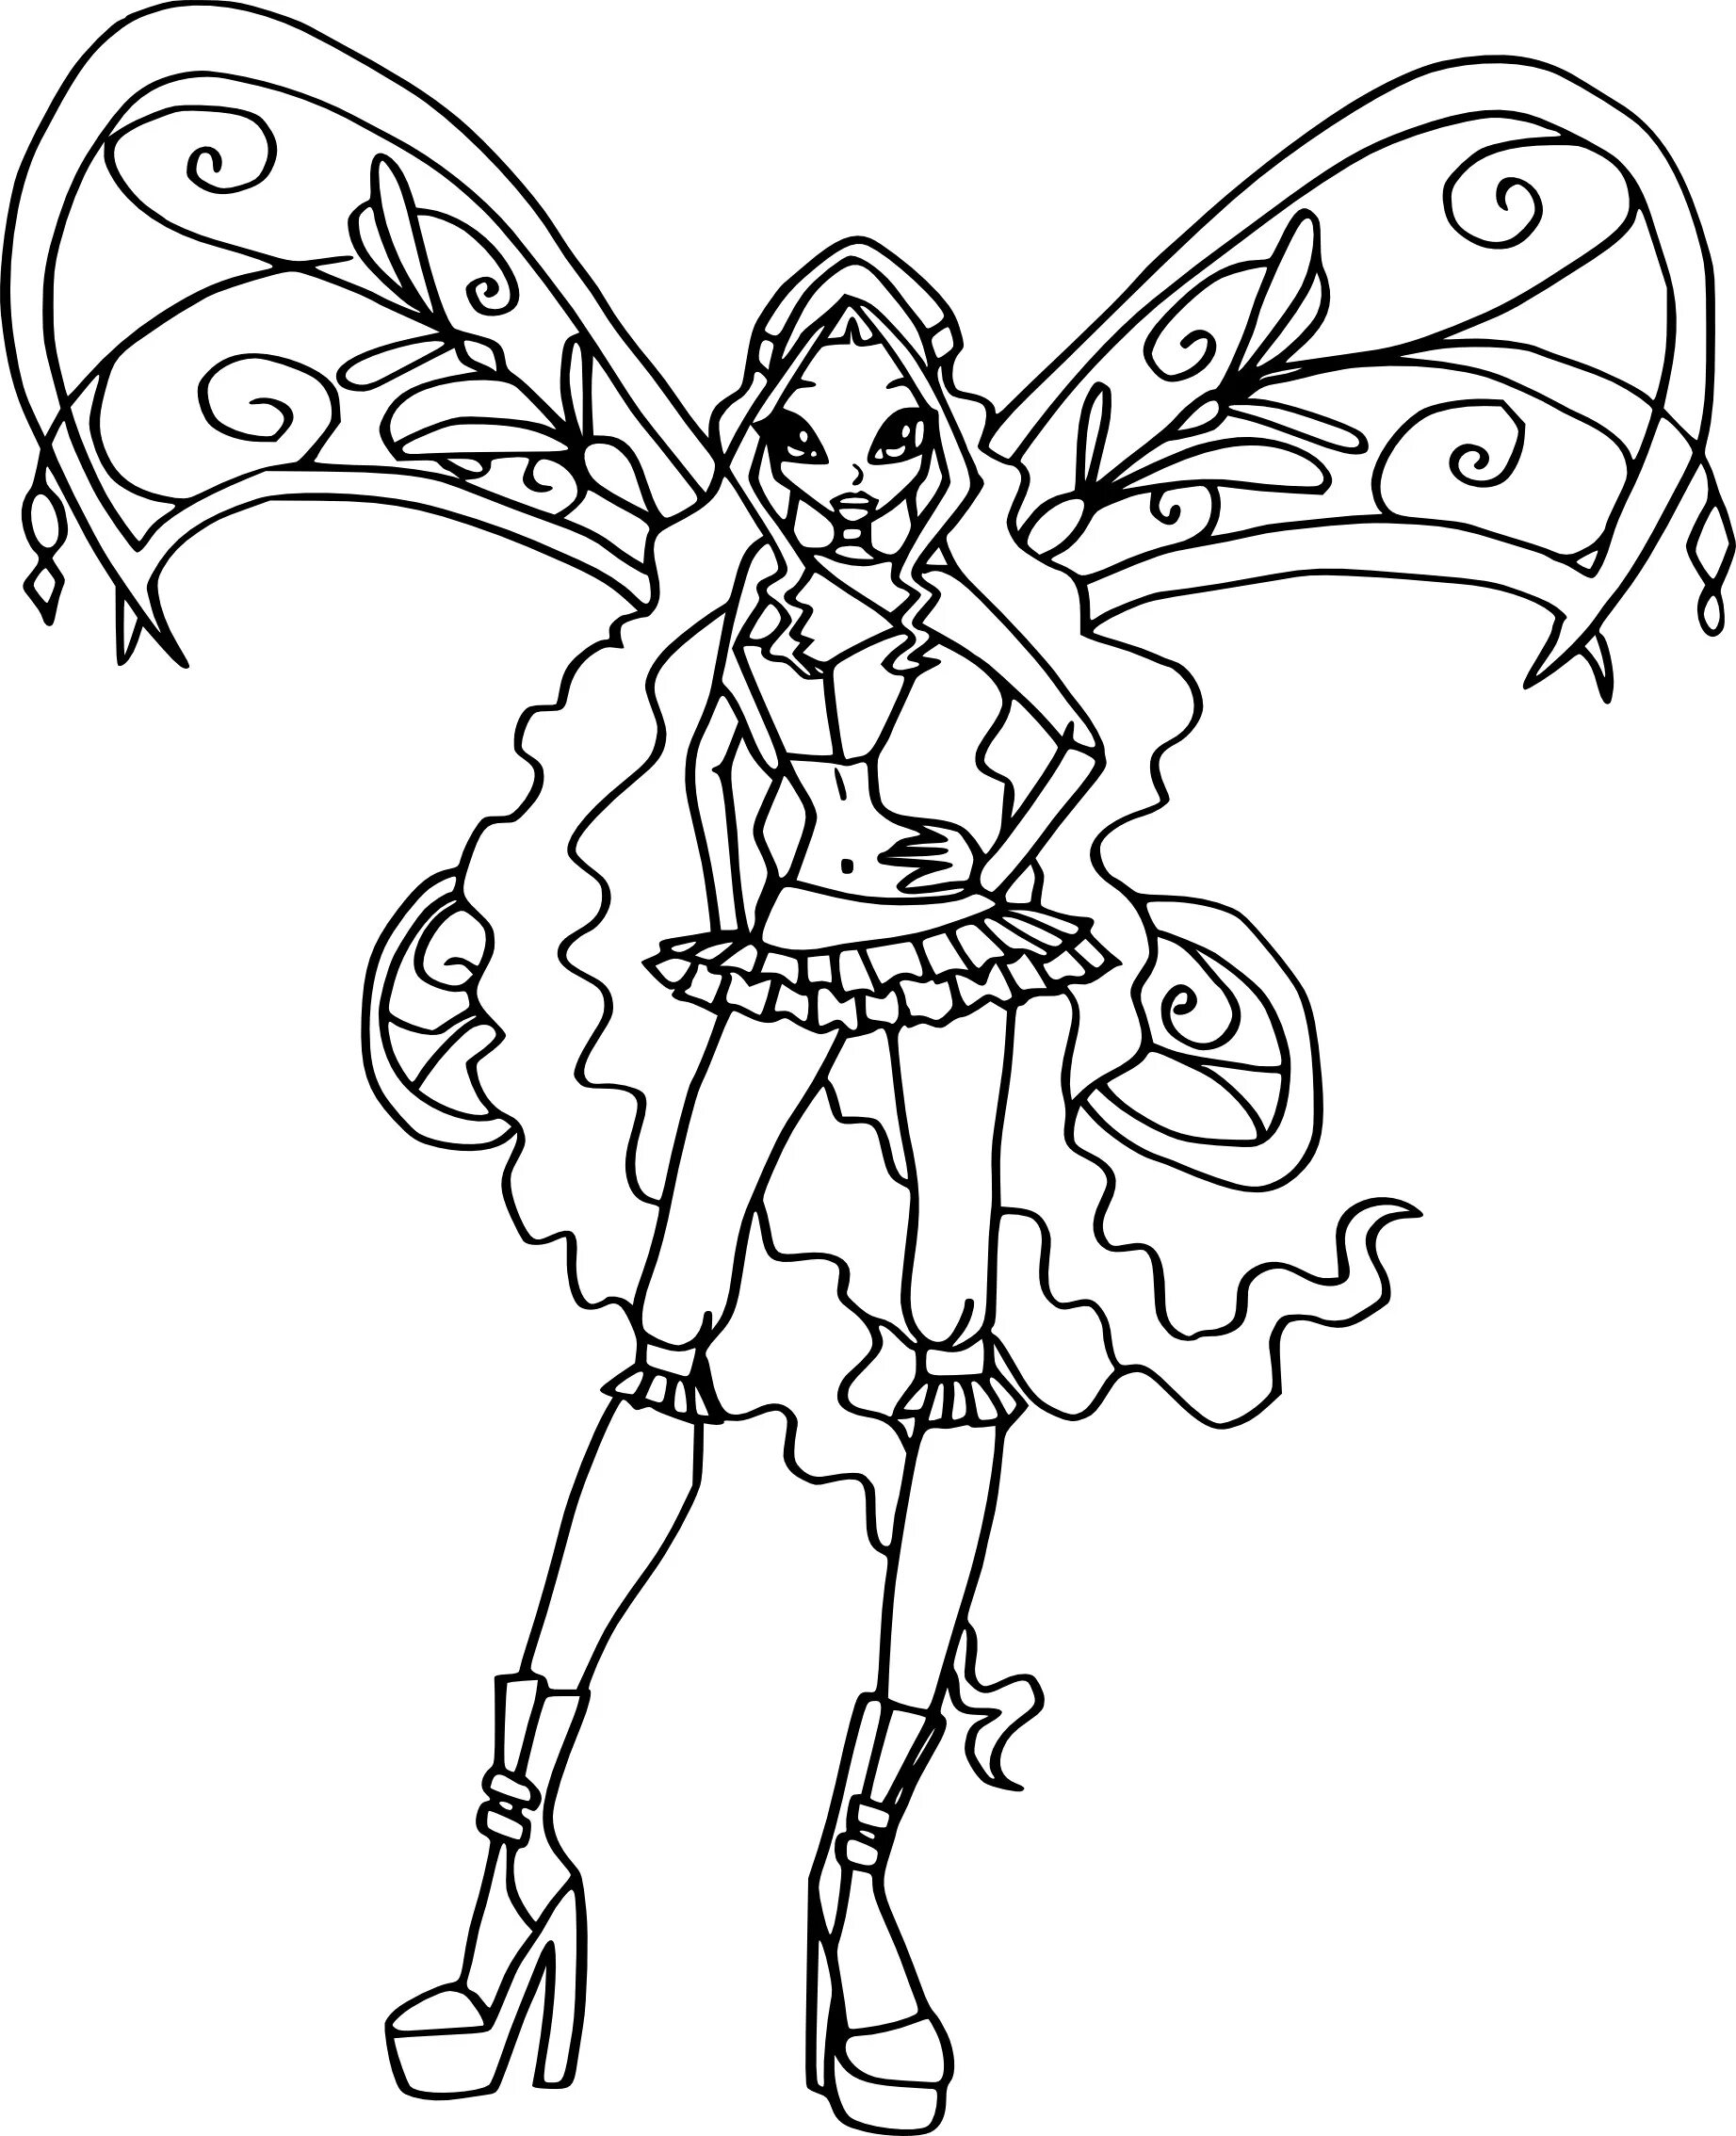 Colorific layla dooley coloring page